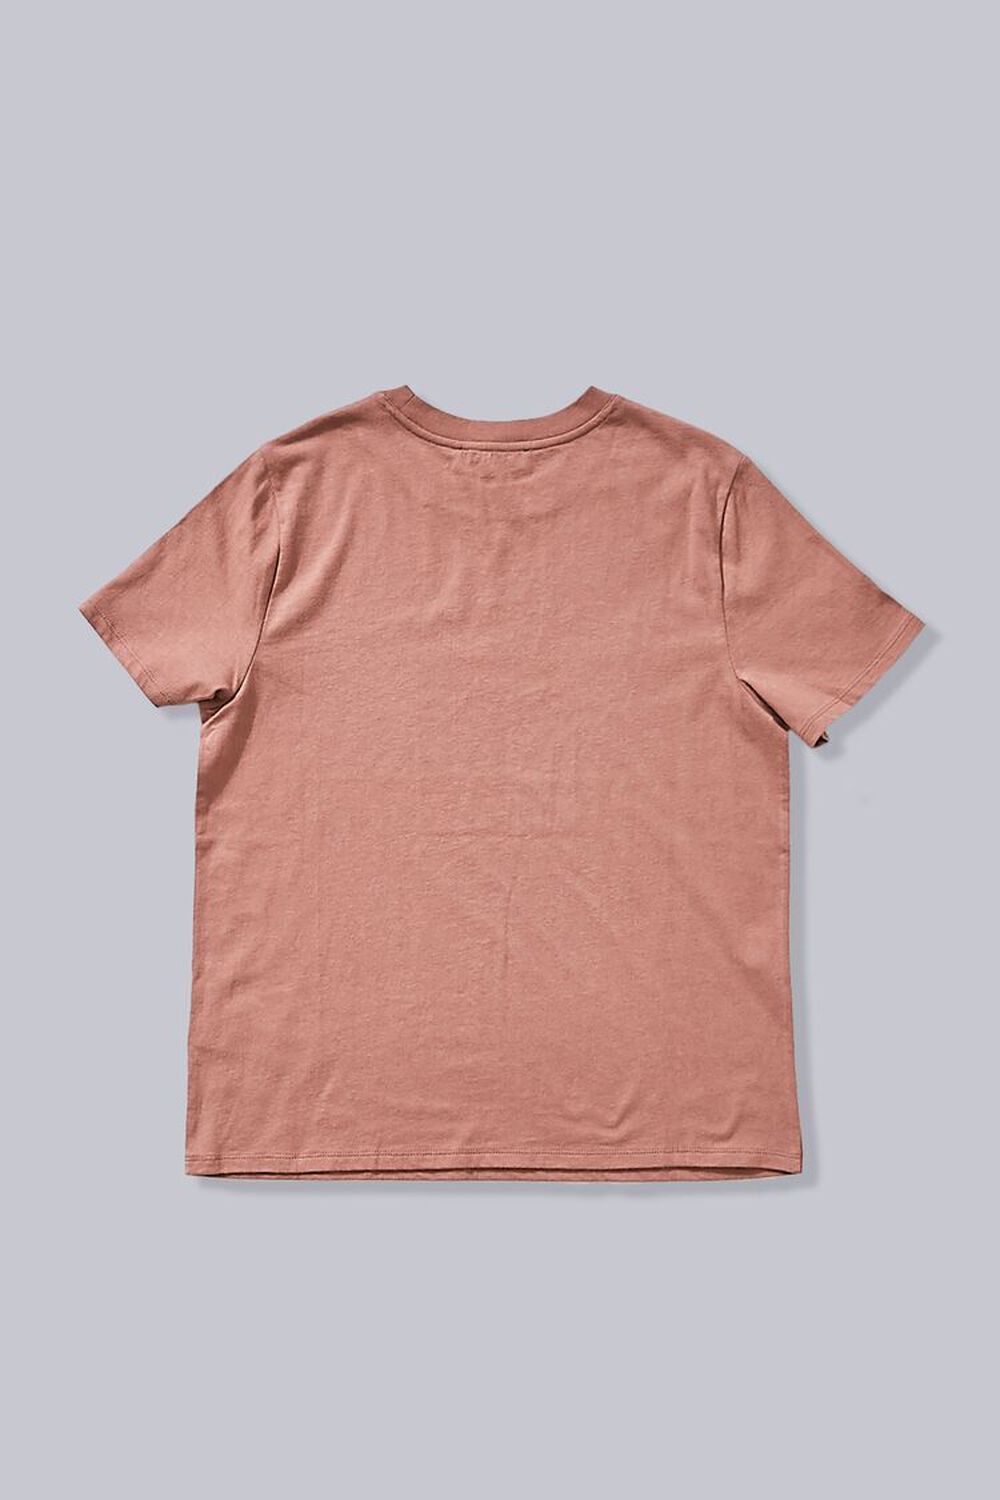 BROWN/MULTI Organically Grown Cotton Graphic Tee, image 2